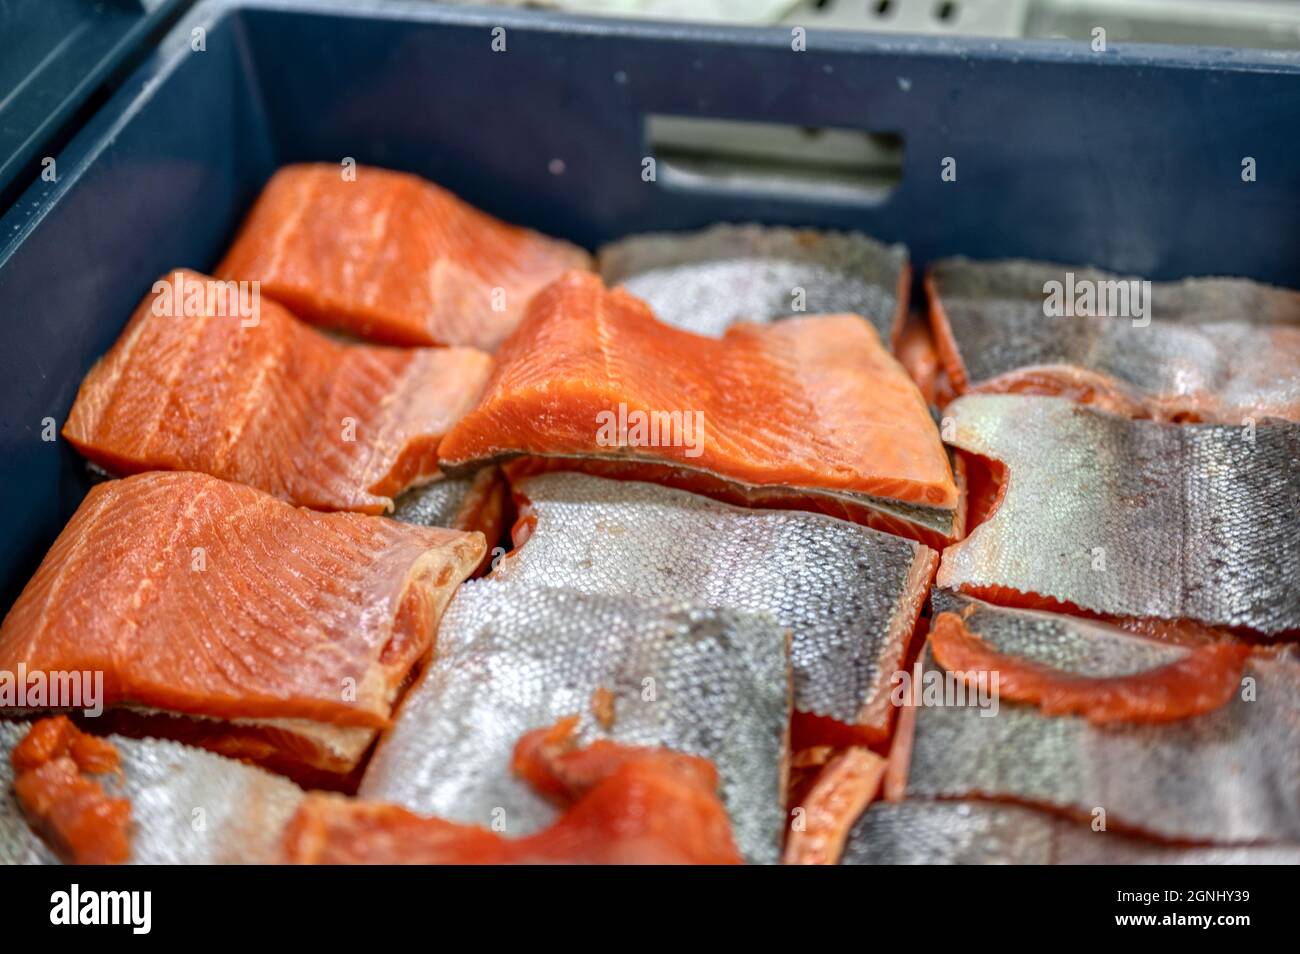 Many pieces of salmon and trout fillet, close-up photo. Stock Photo